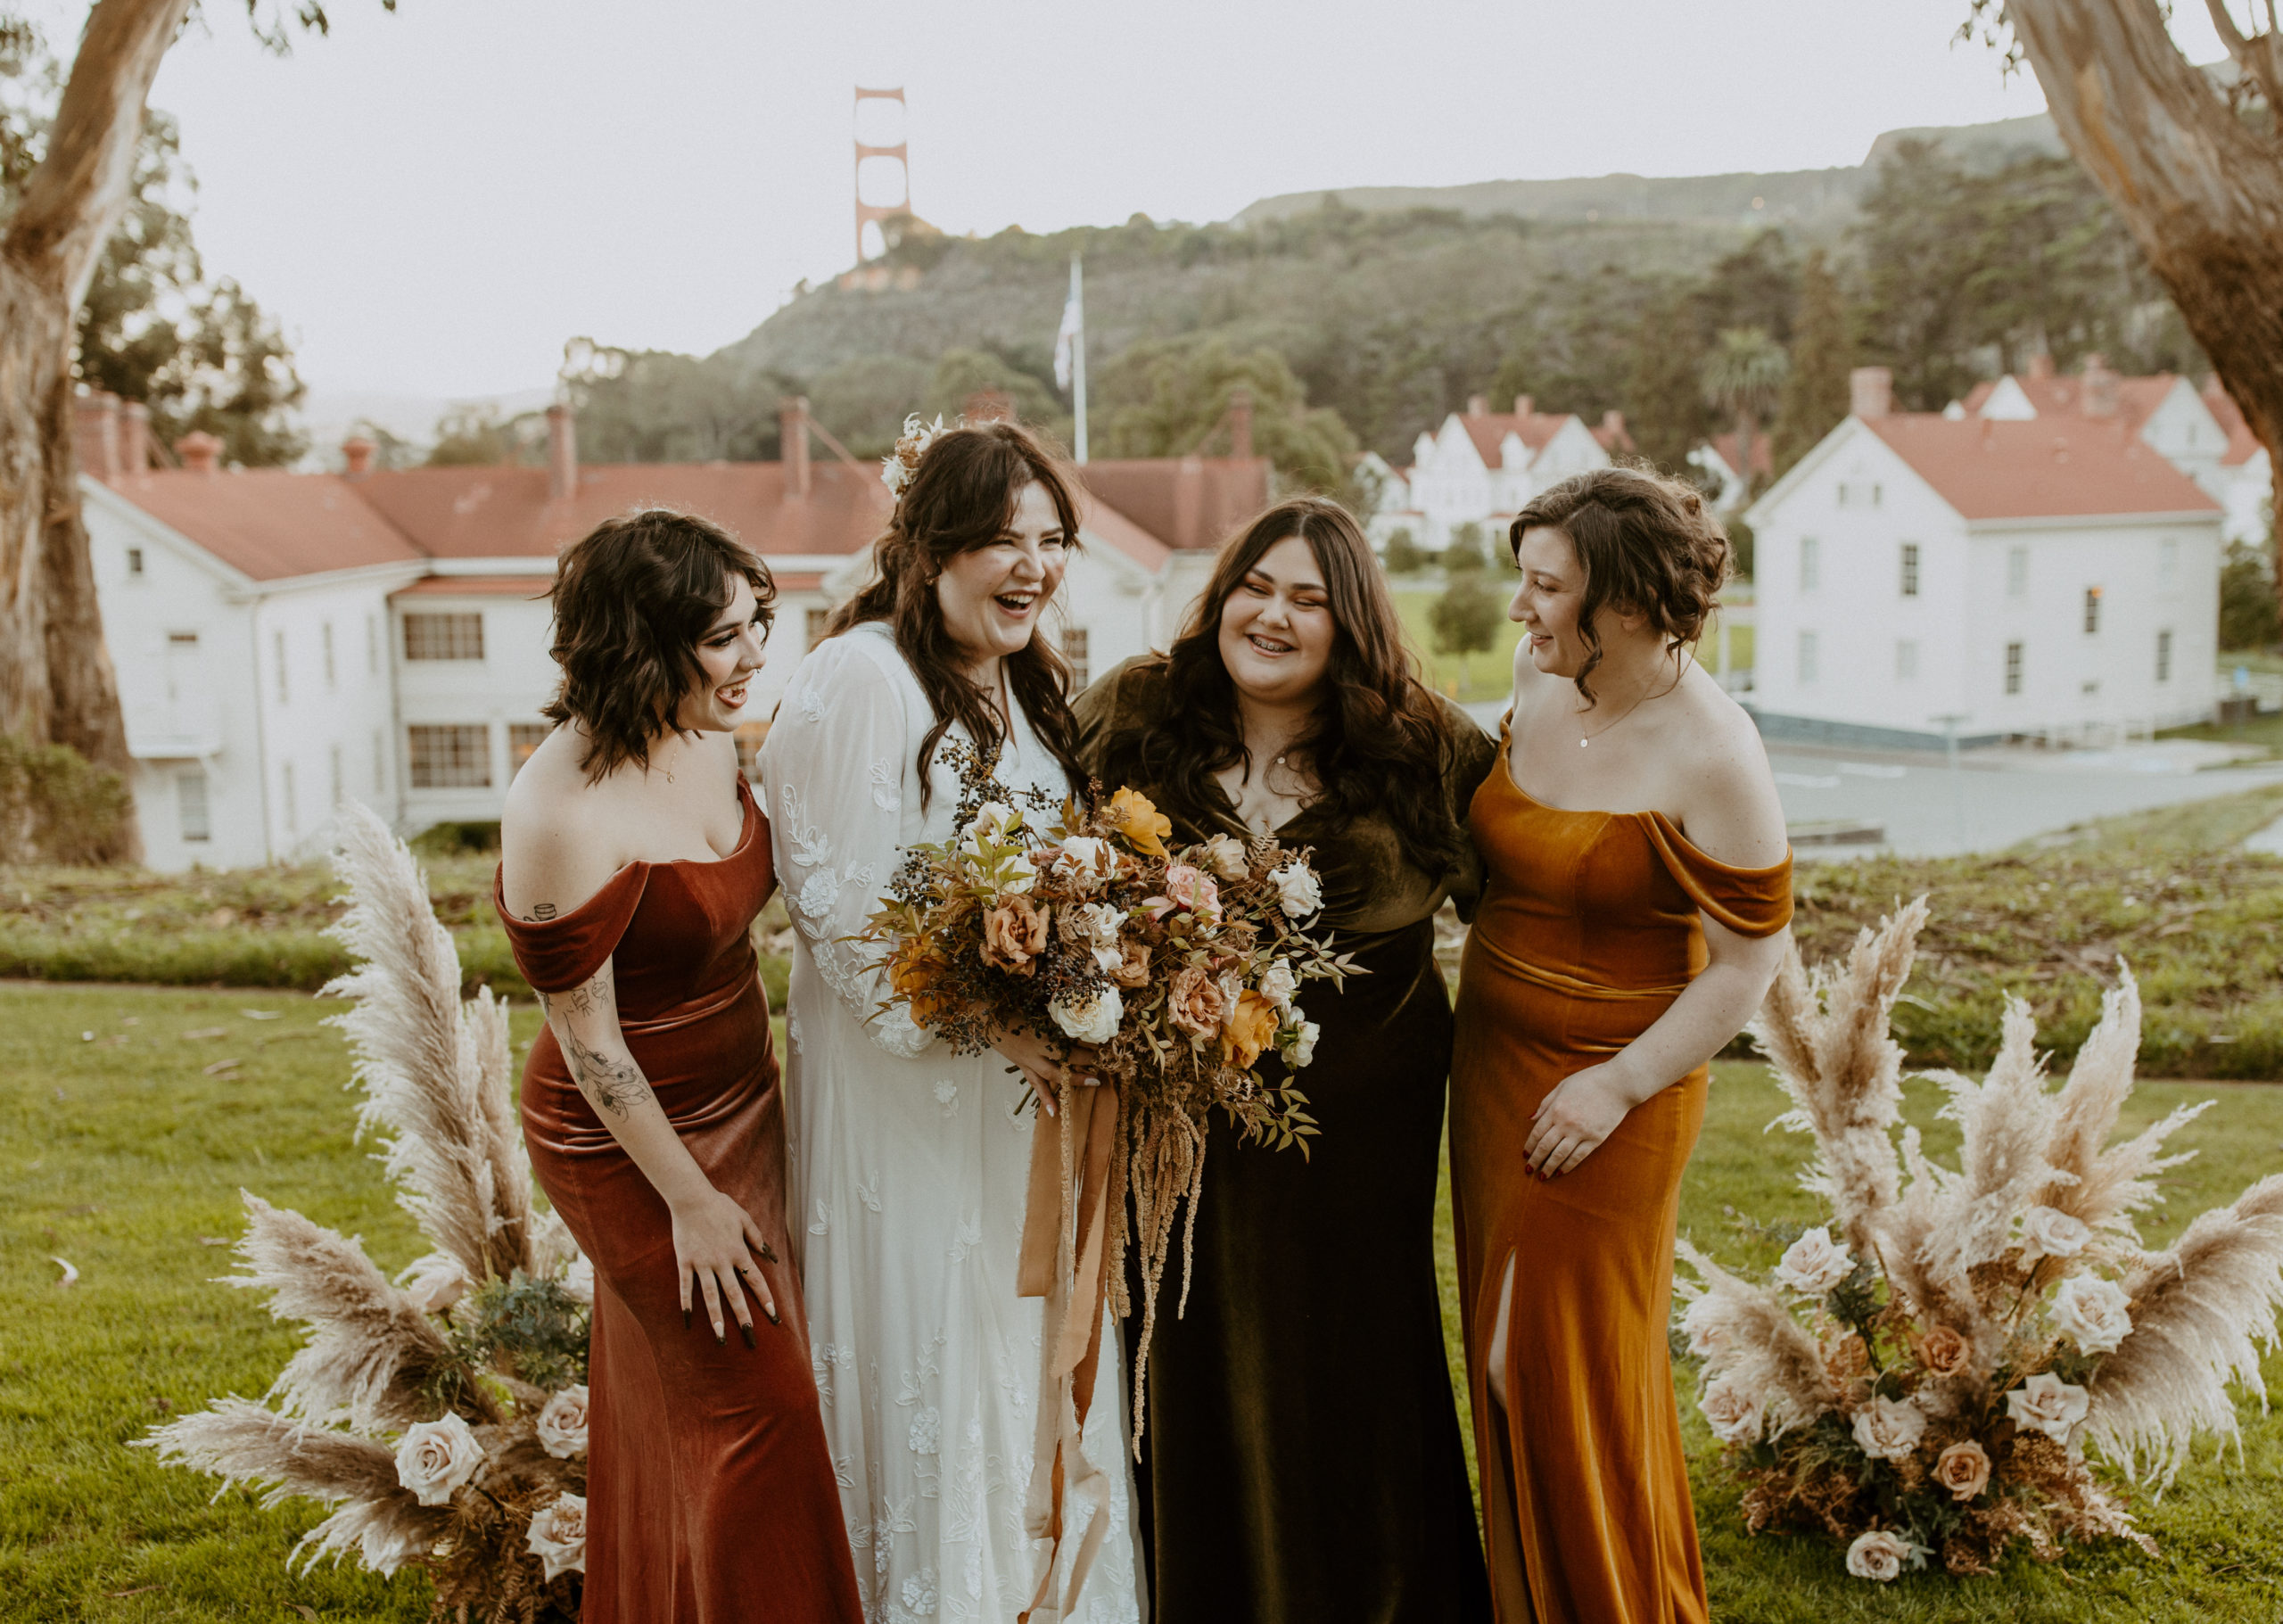 the bride and her bridesmaids laughing together